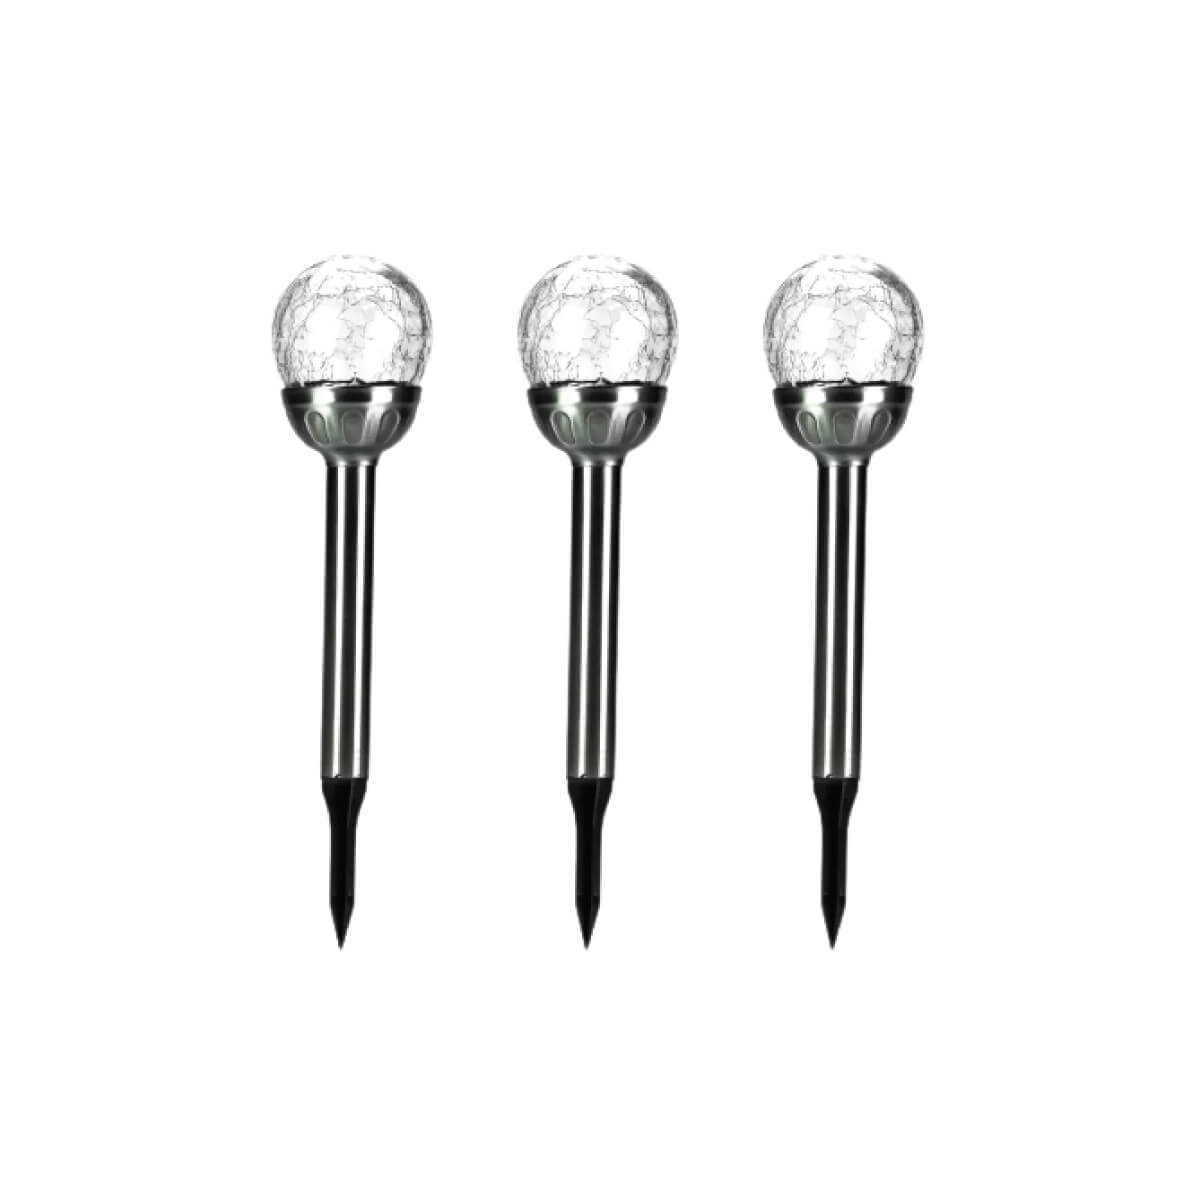 View Pack of 3 Sydney White LED Solar Crackle Ball Stake Lights information